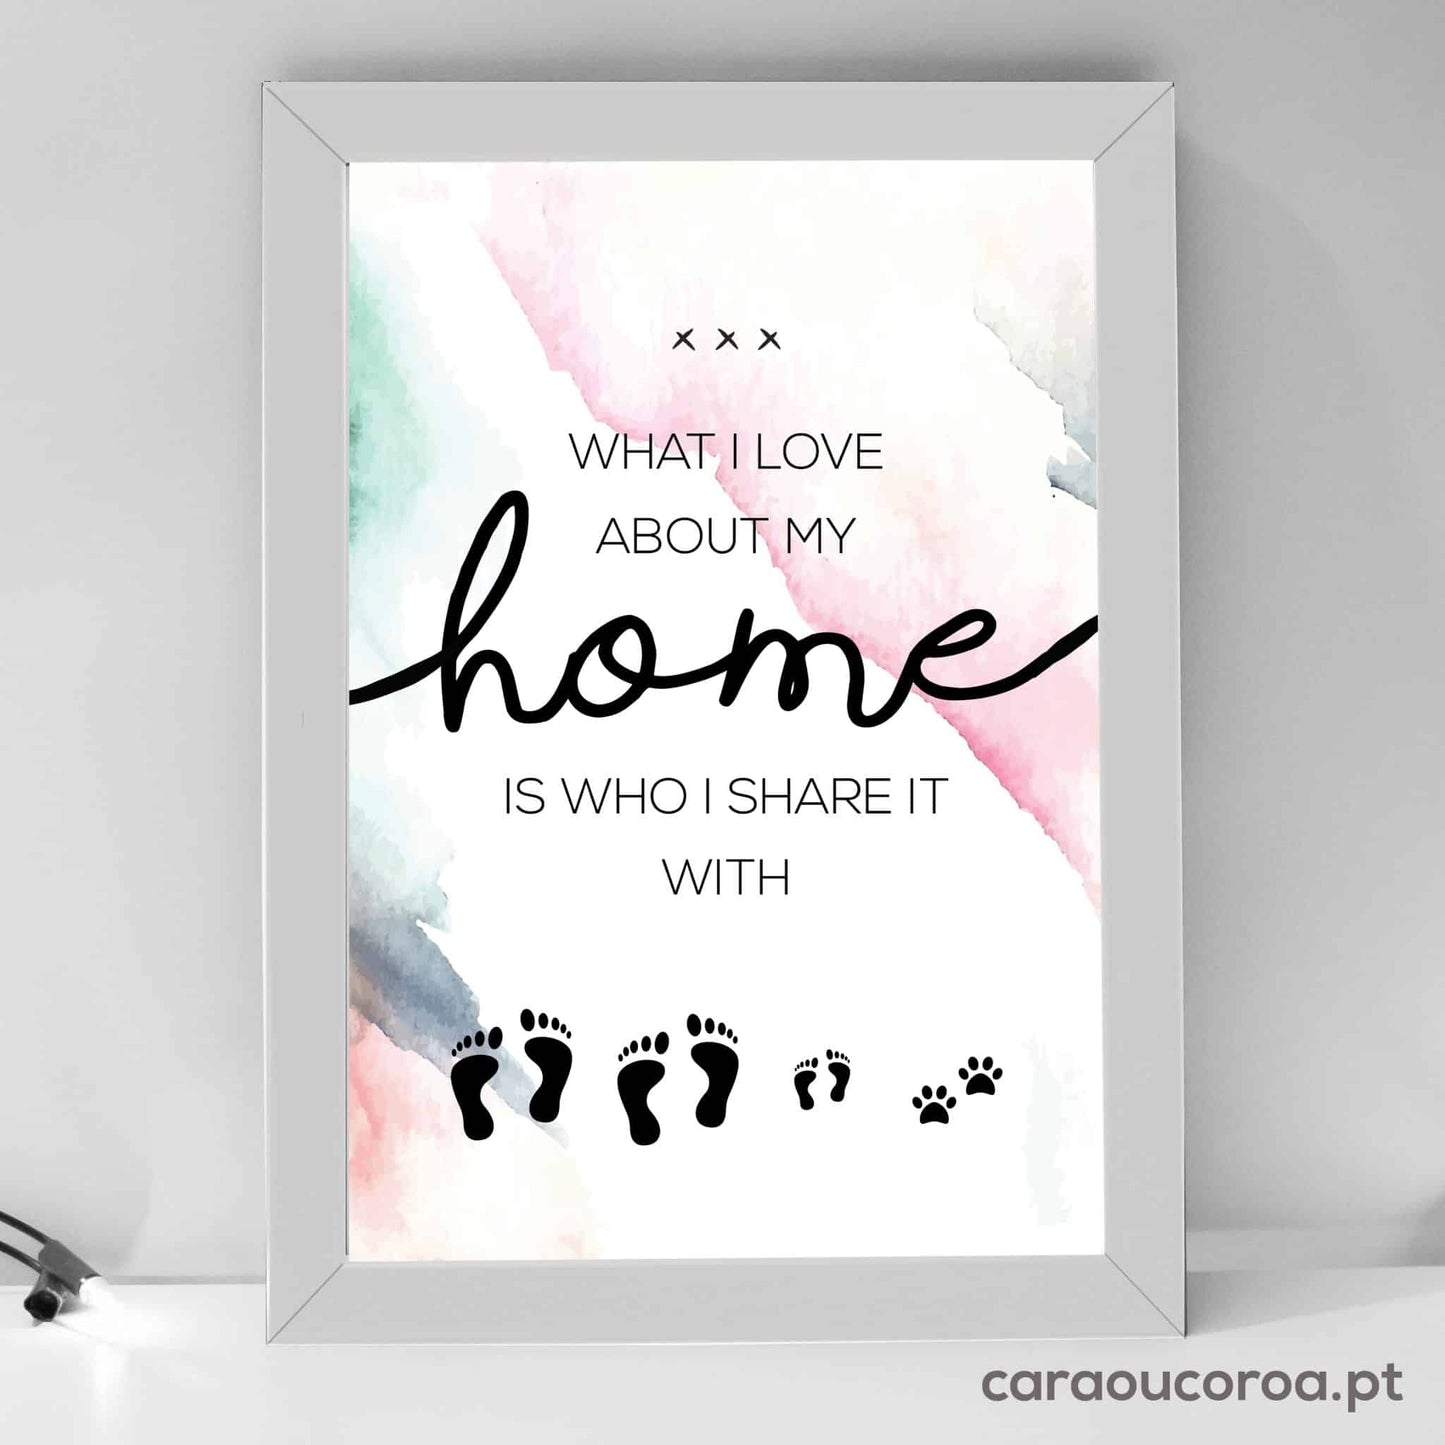 Quadro "What I Love About My Home" - caraoucoroa.pt